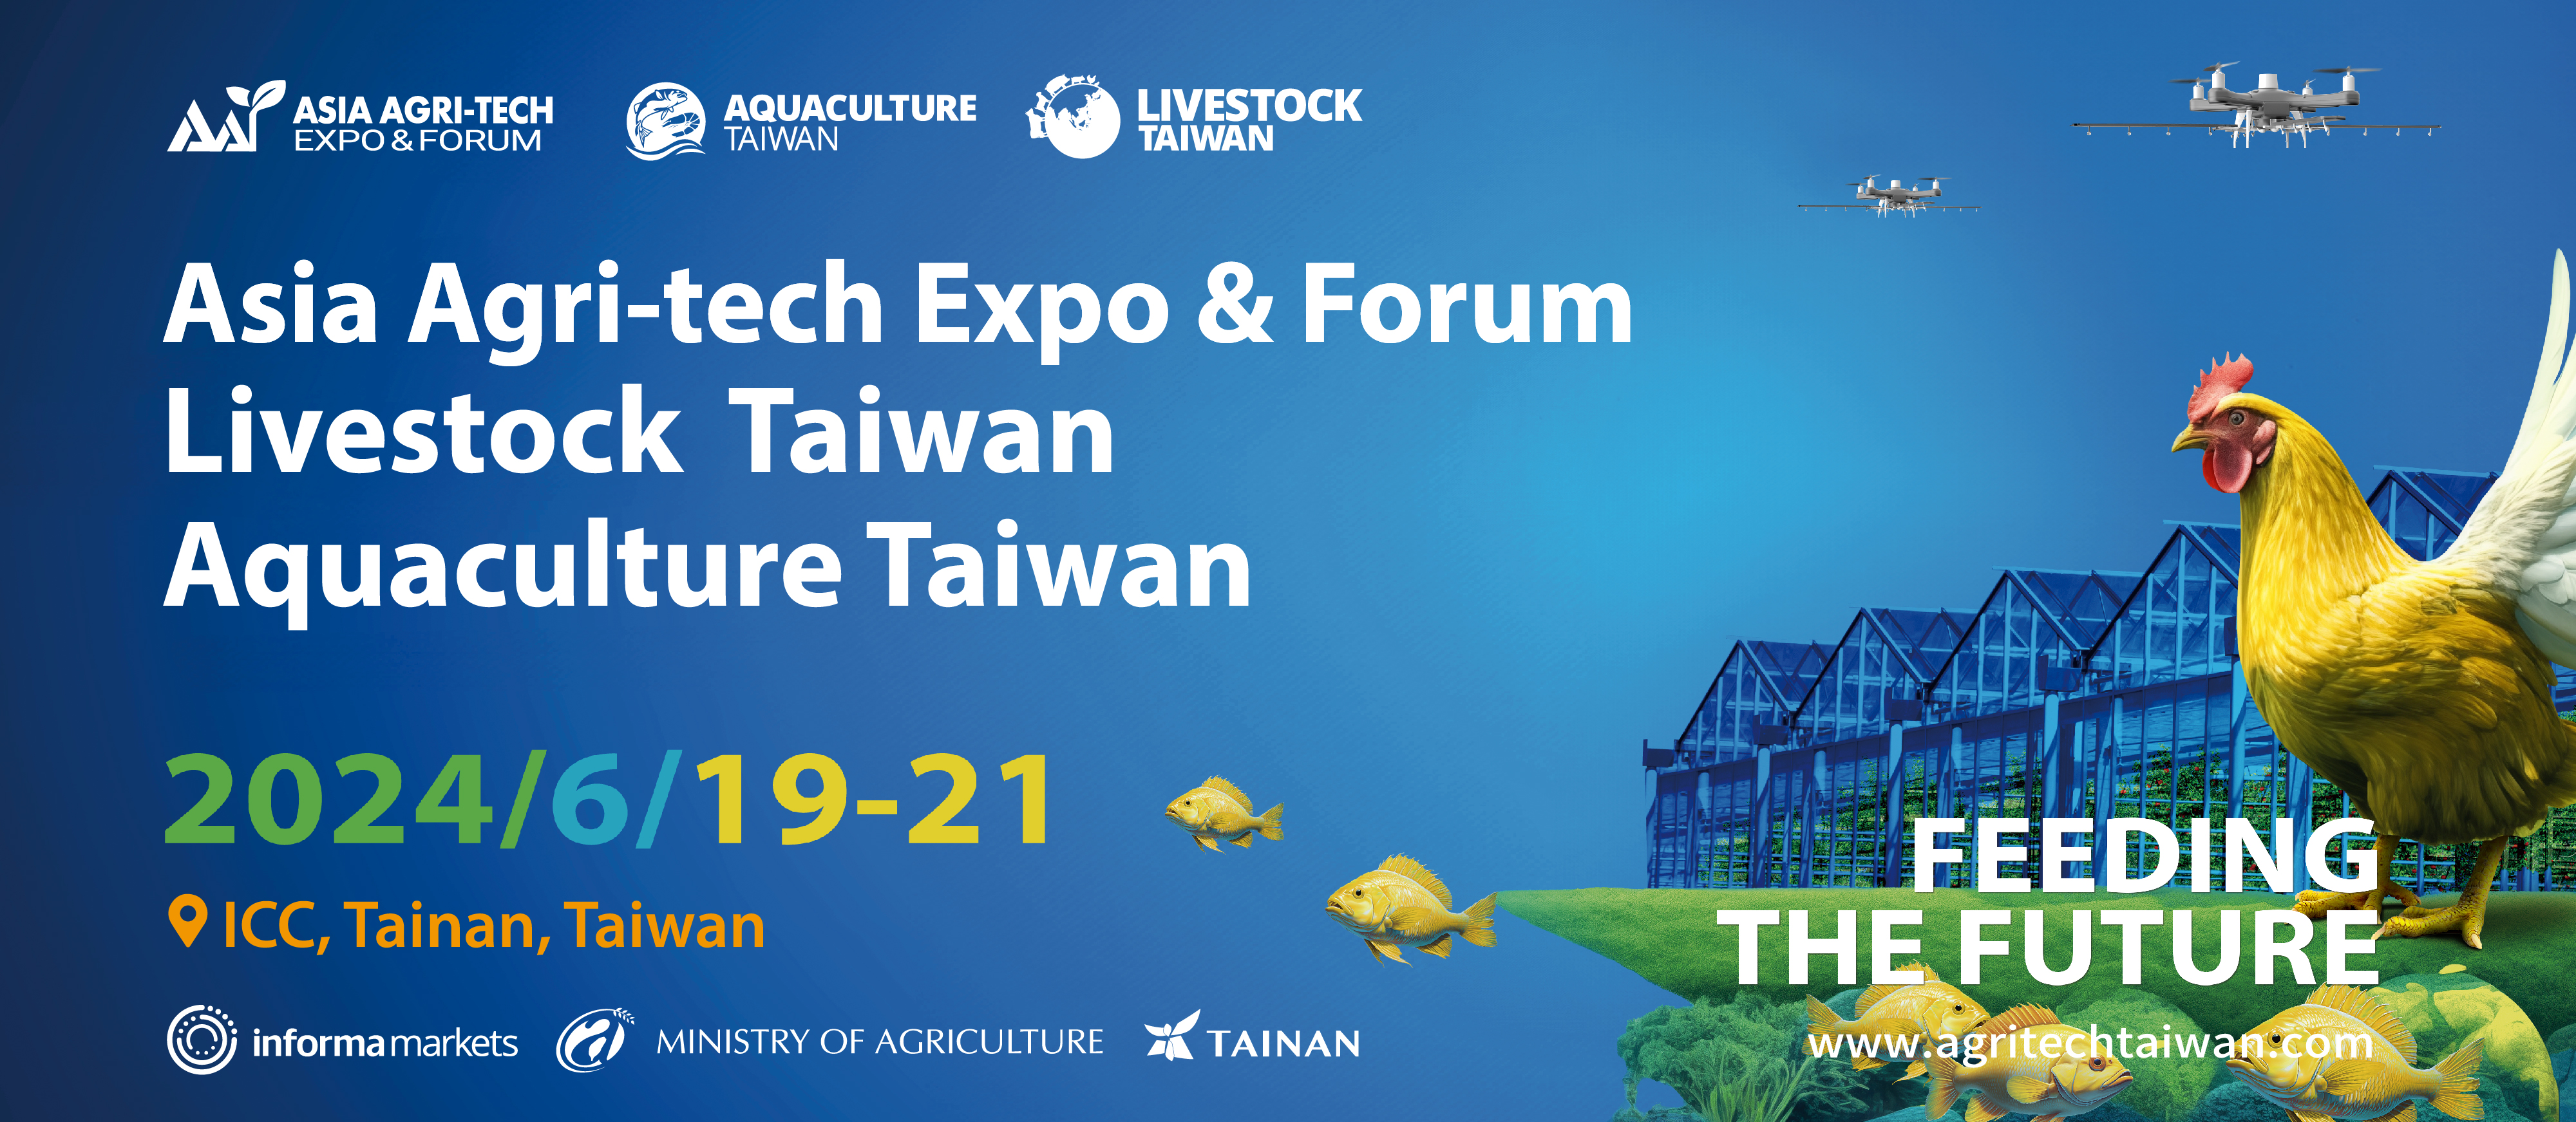 The 2024 Asia Agri-Tech Expo & Forum Demonstrates Taiwan’s Prowess on Smart Farming & Biotechnology, brings in Future and Revolution to Agriculture, Livestock and Aquaculture Industries 